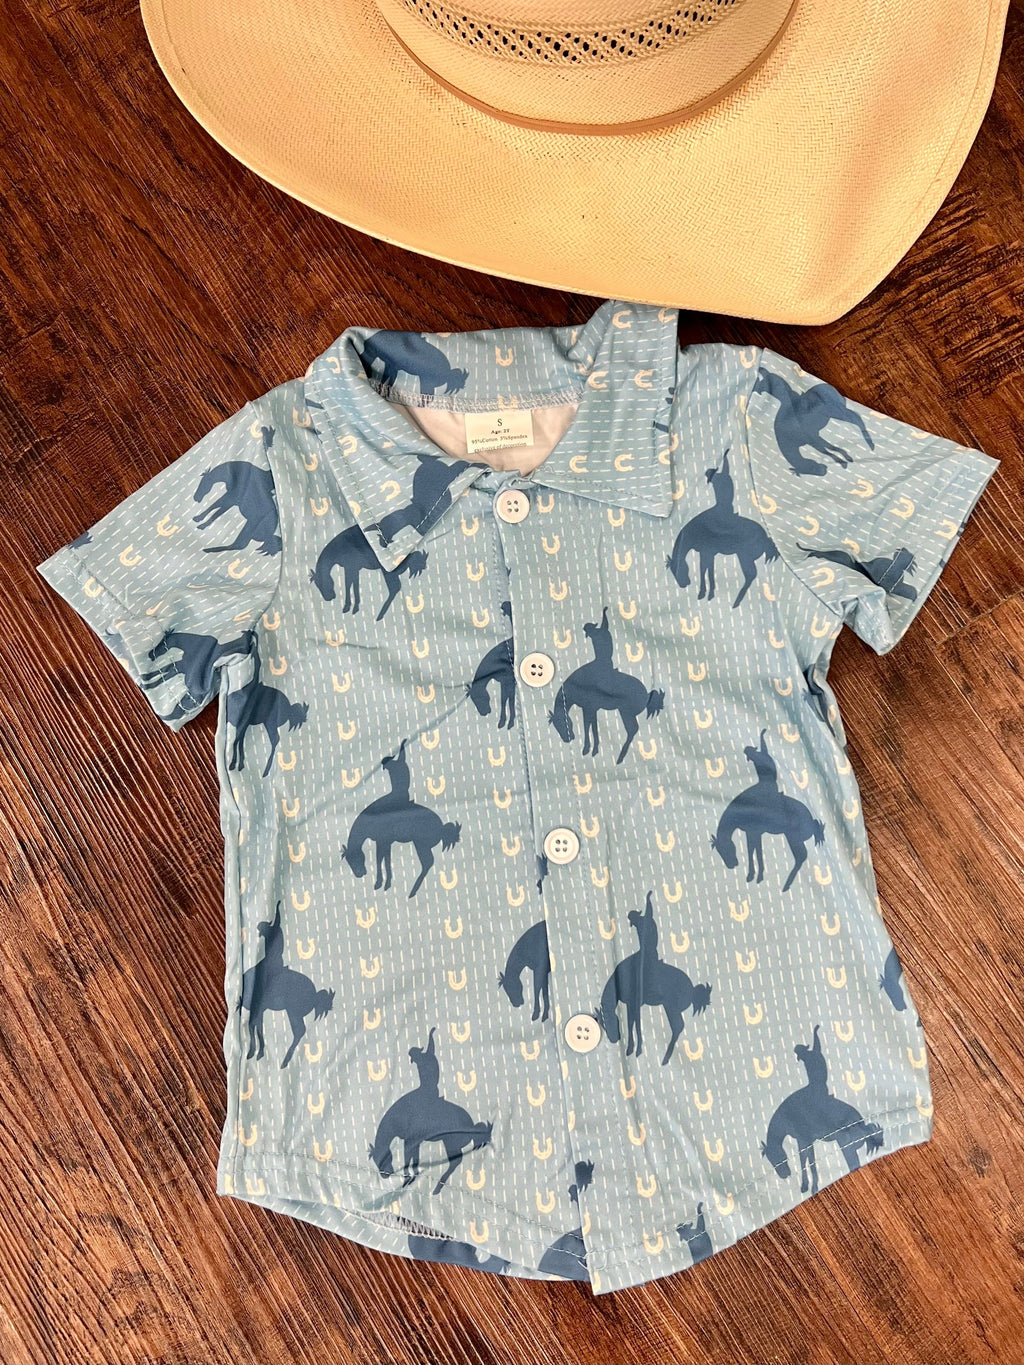 This Kids Lucky Cowboy Button Up is the perfect way to add a dash of western style to your little one's wardrobe! In a baby blue hue, this short-sleeved collared shirt will have them galloping around in style with its bucking-horse, horseshoe detailing. Yeehaw!  95% Cotton, 5% Spandex